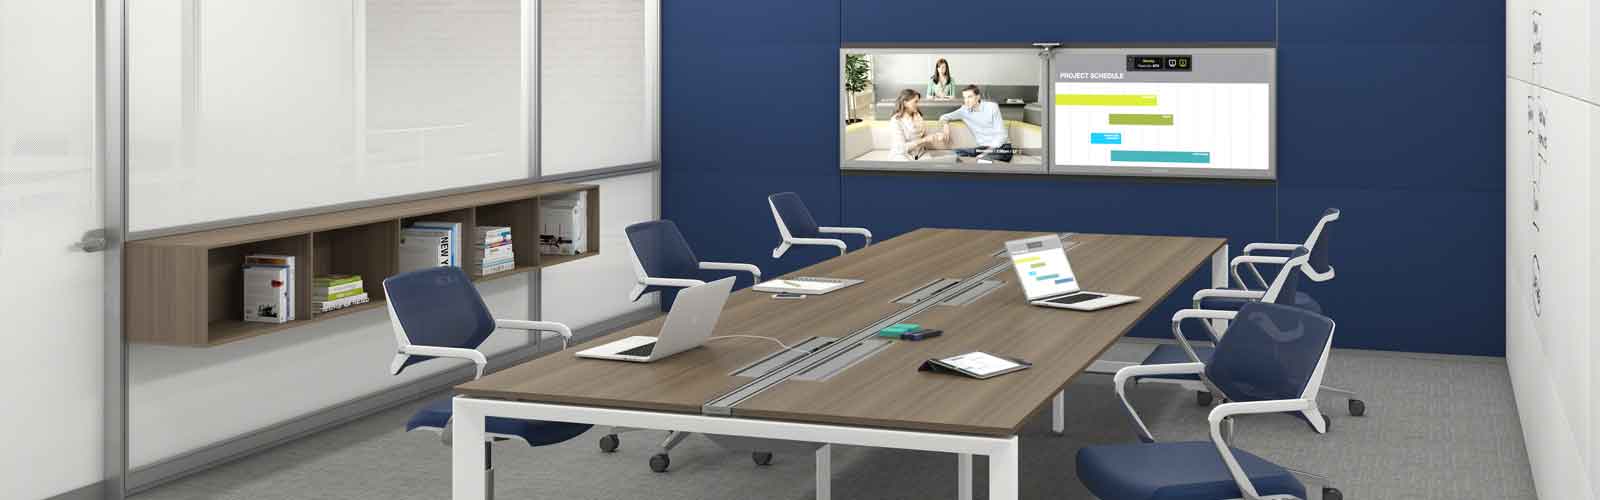 Informal meeting space within office setting